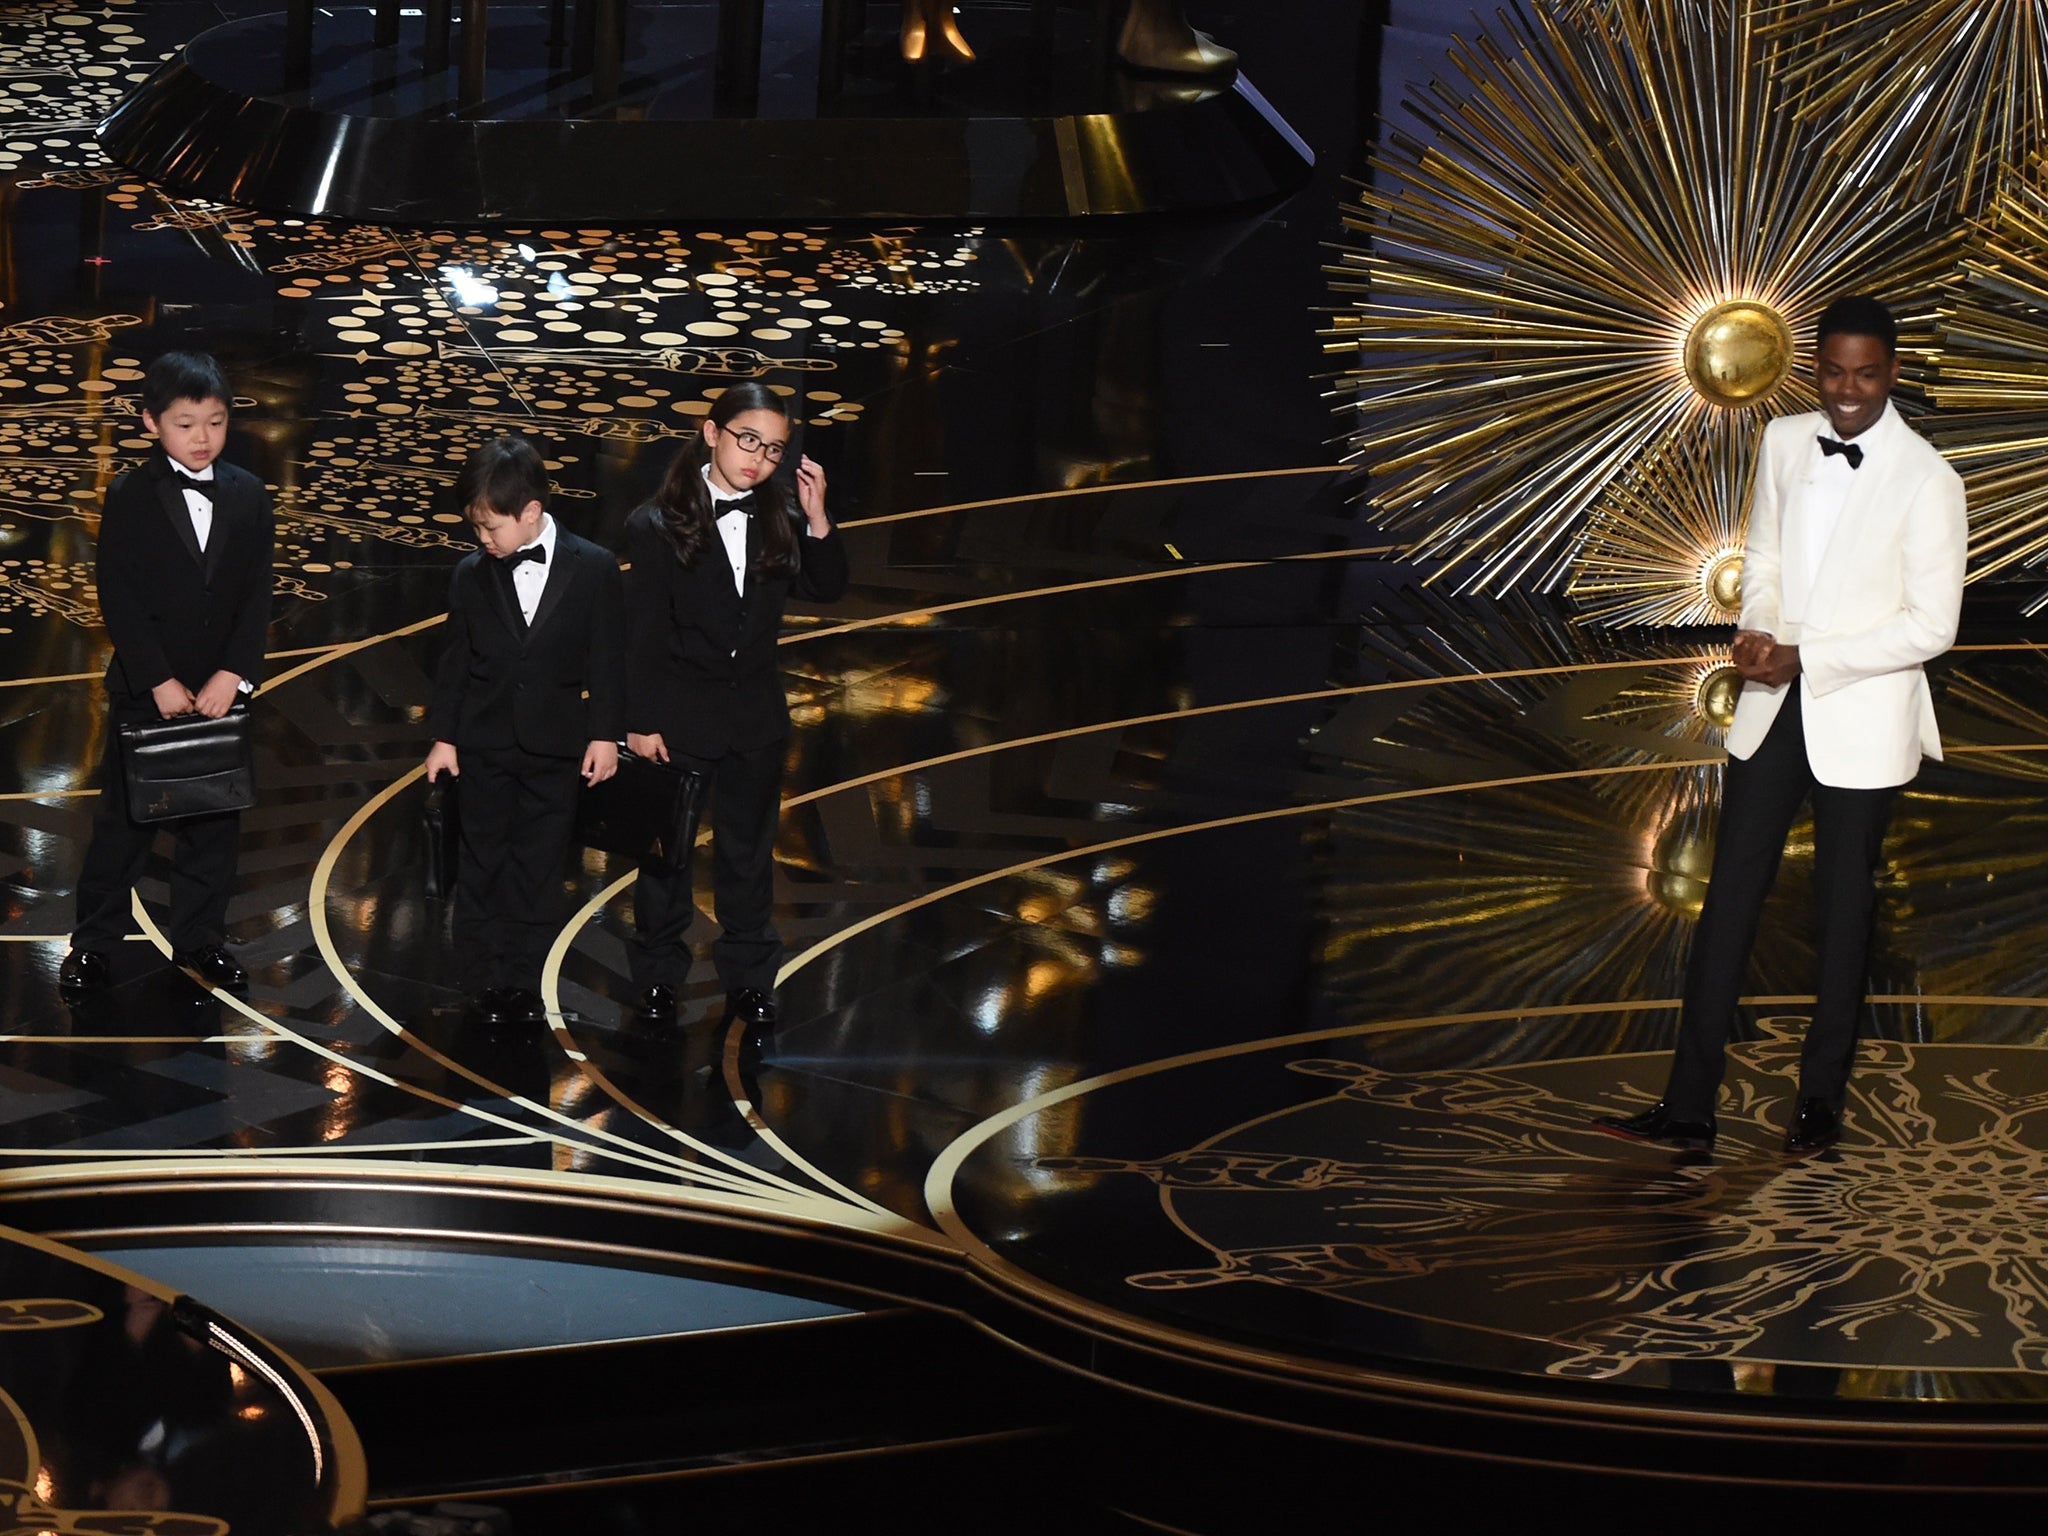 Actor Chris Rock presents children representing accountants from PricewaterhouseCoopers on stage at the Oscars